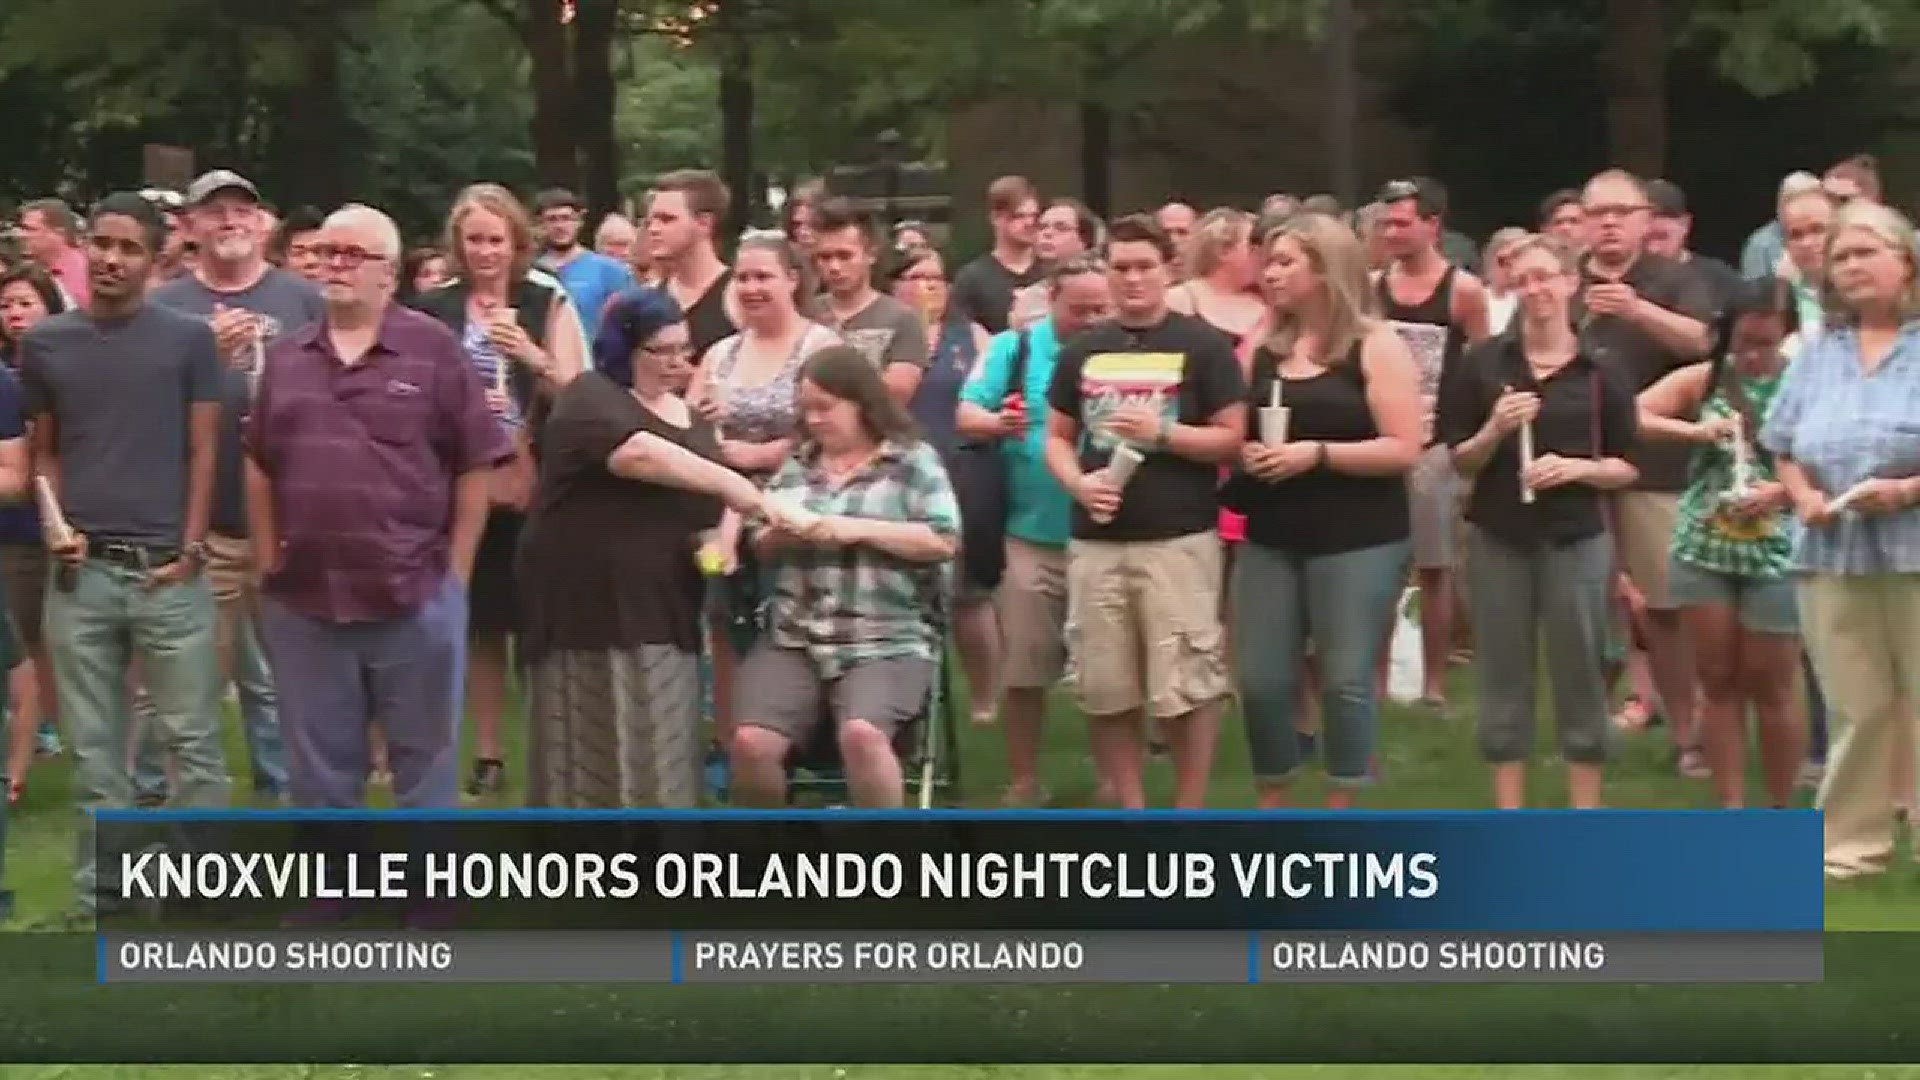 Hundreds gathered in Krutch Park to honor the victims killed in an Orlando nightclub shooting.